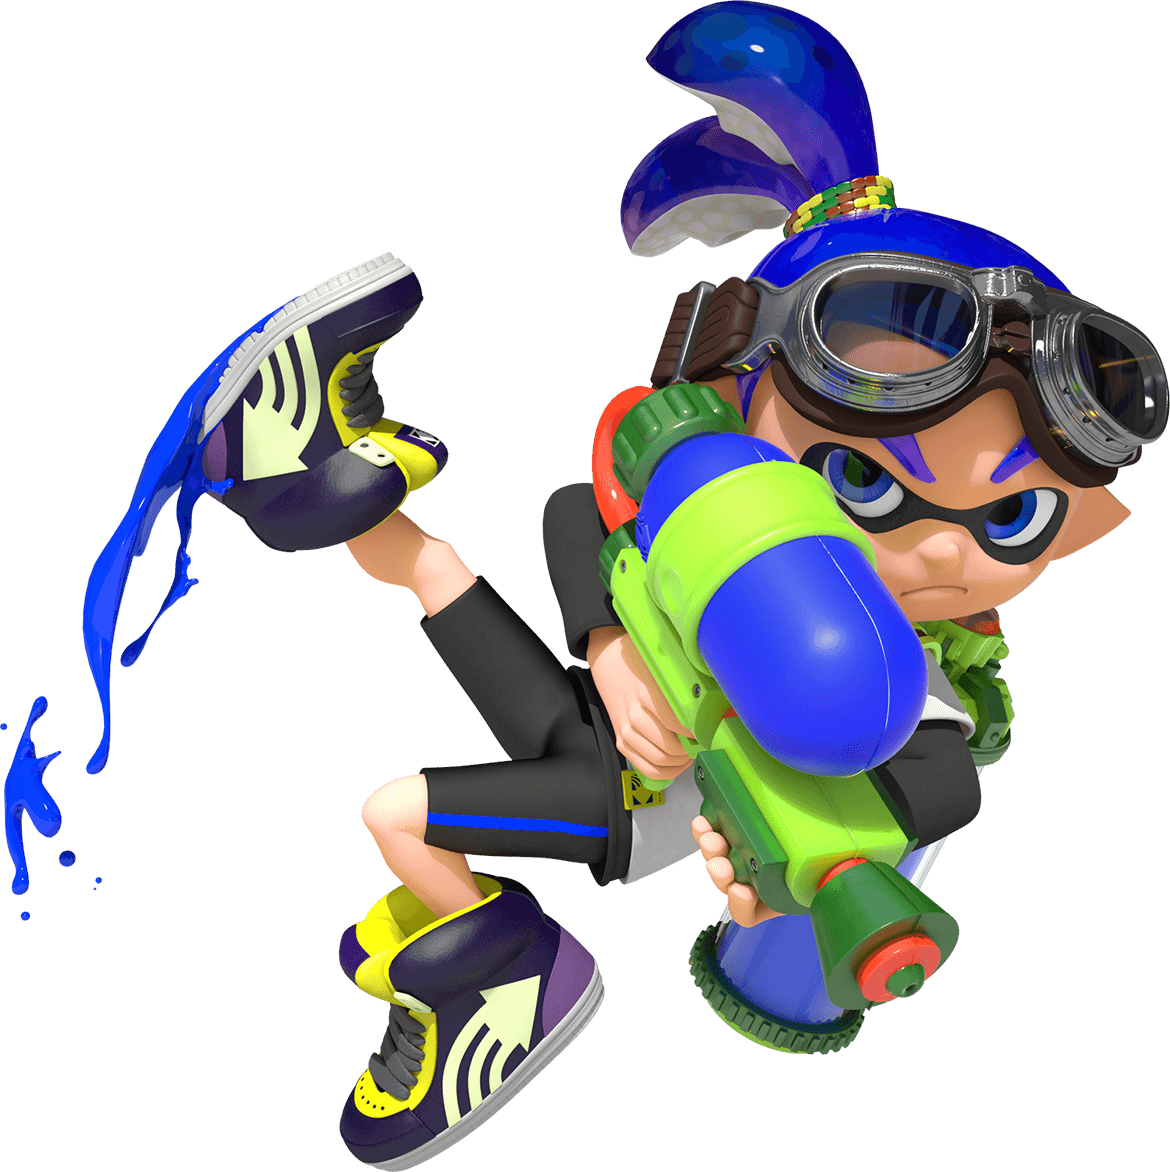 the inkling